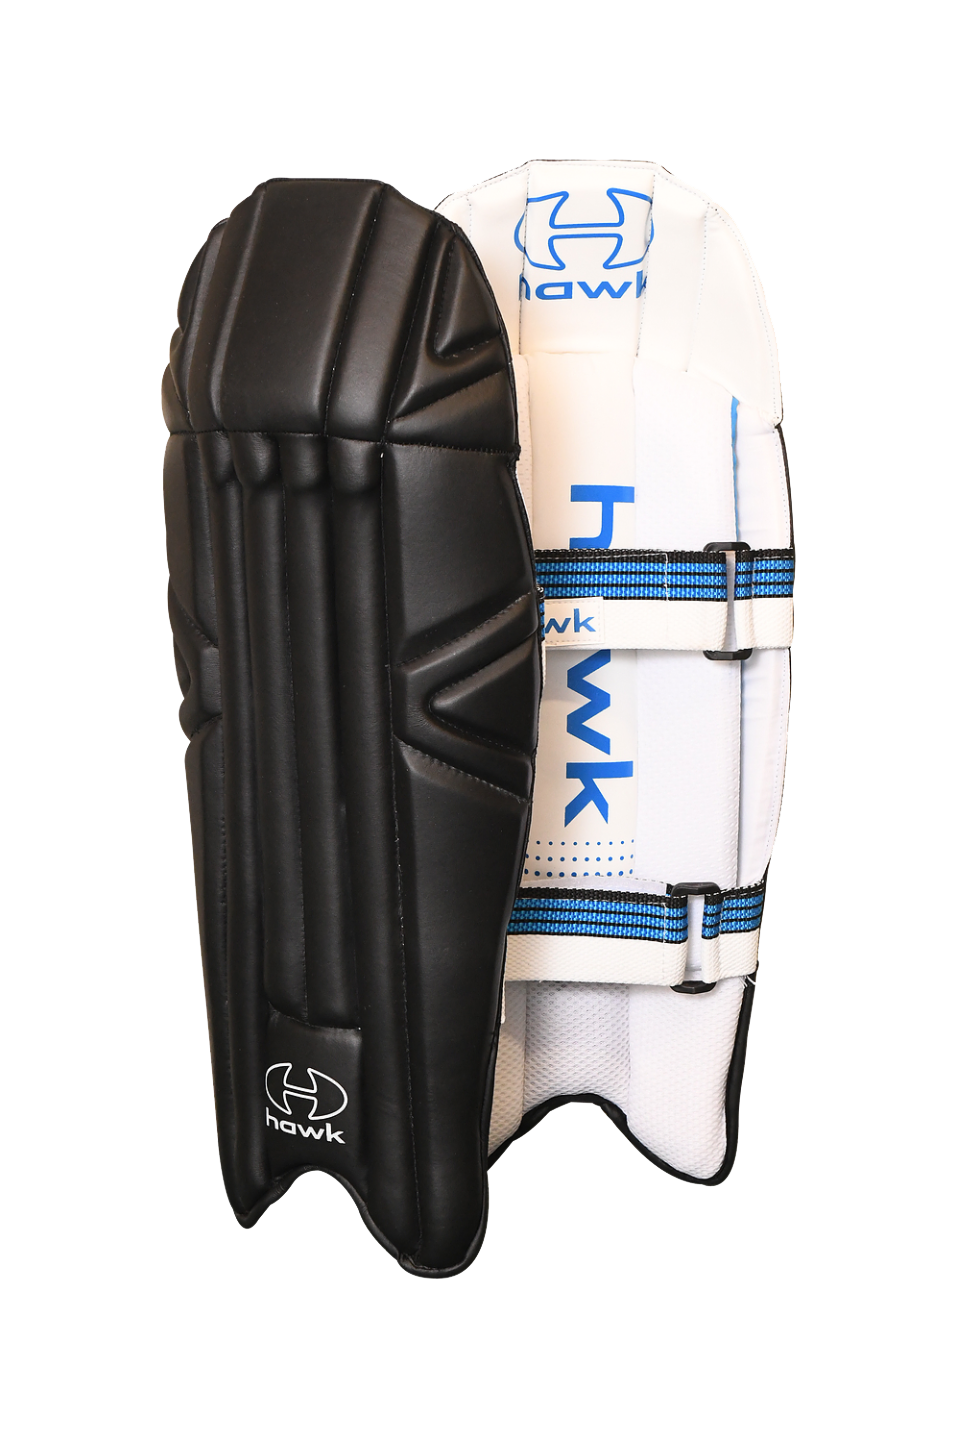 Hawk XB900 Series Two Limited Over Wicket Keeping Pads